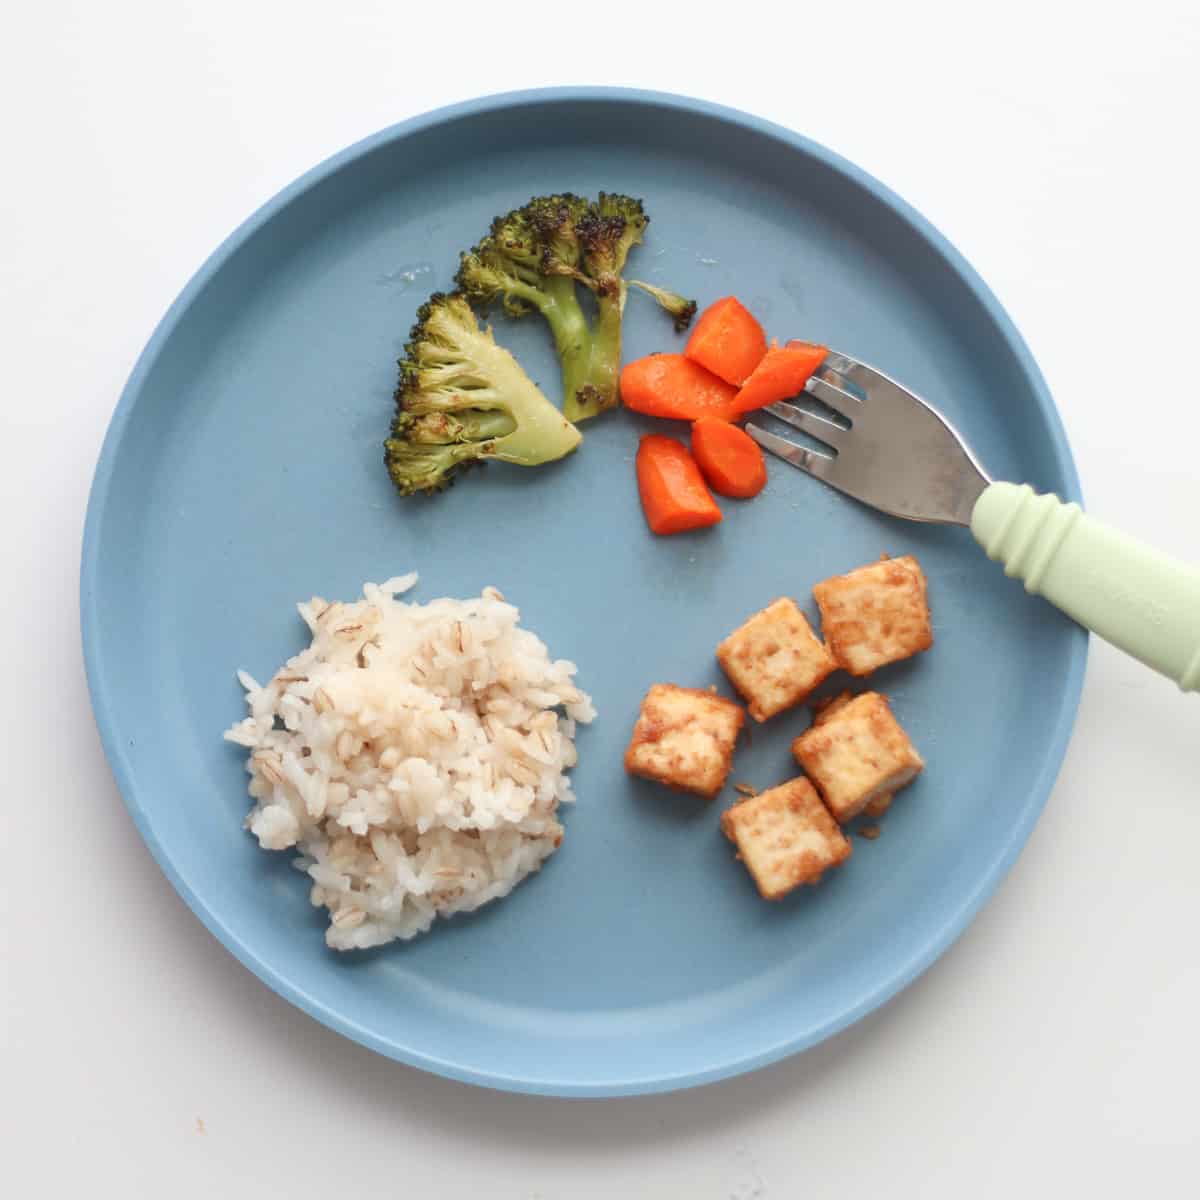 A toddler plate with a small portion of rice, vegetables, and tofu.